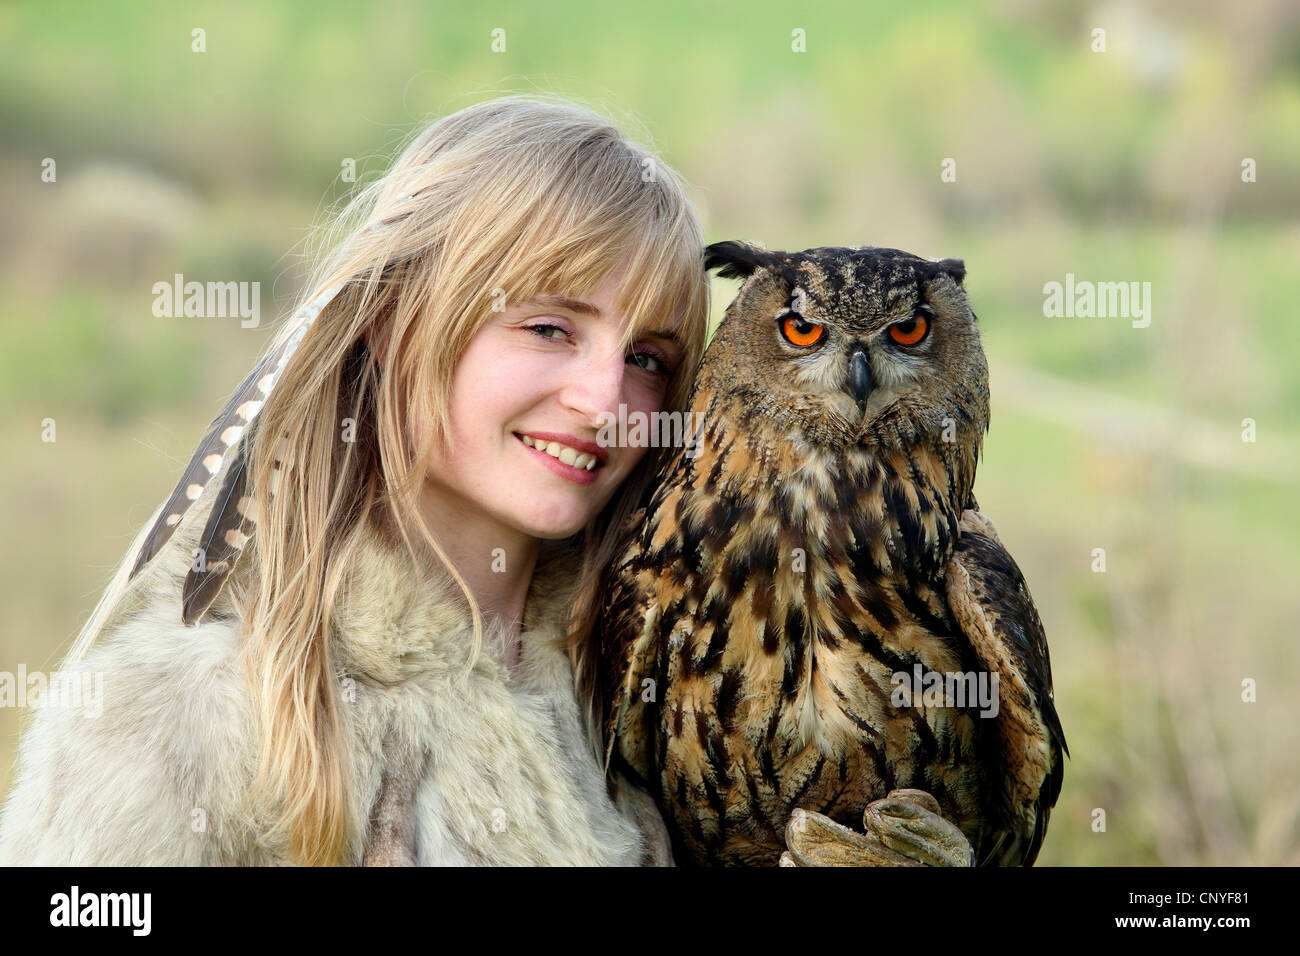 northern eagle owl (Bubo bubo), on the arm of a young woman Stock Photo